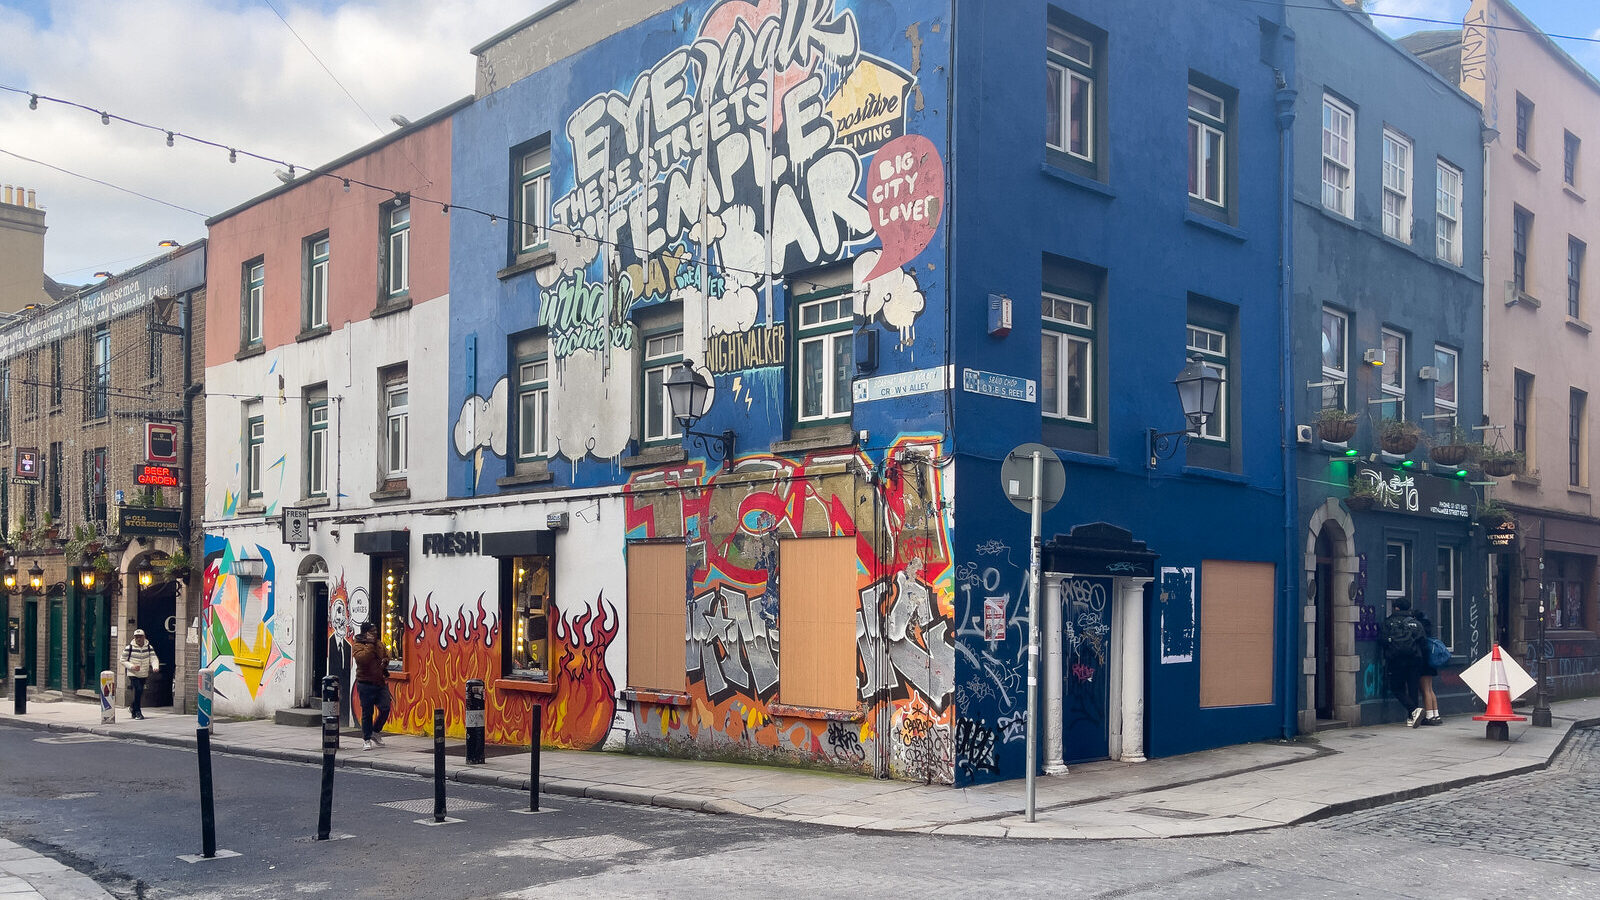 VISITING DUBLIN FOR ST PATRICK'S WEEKEND [IS TEMPLE BAR AS GOOD AS MANY CLAIM IT TO BE?]-229504-1